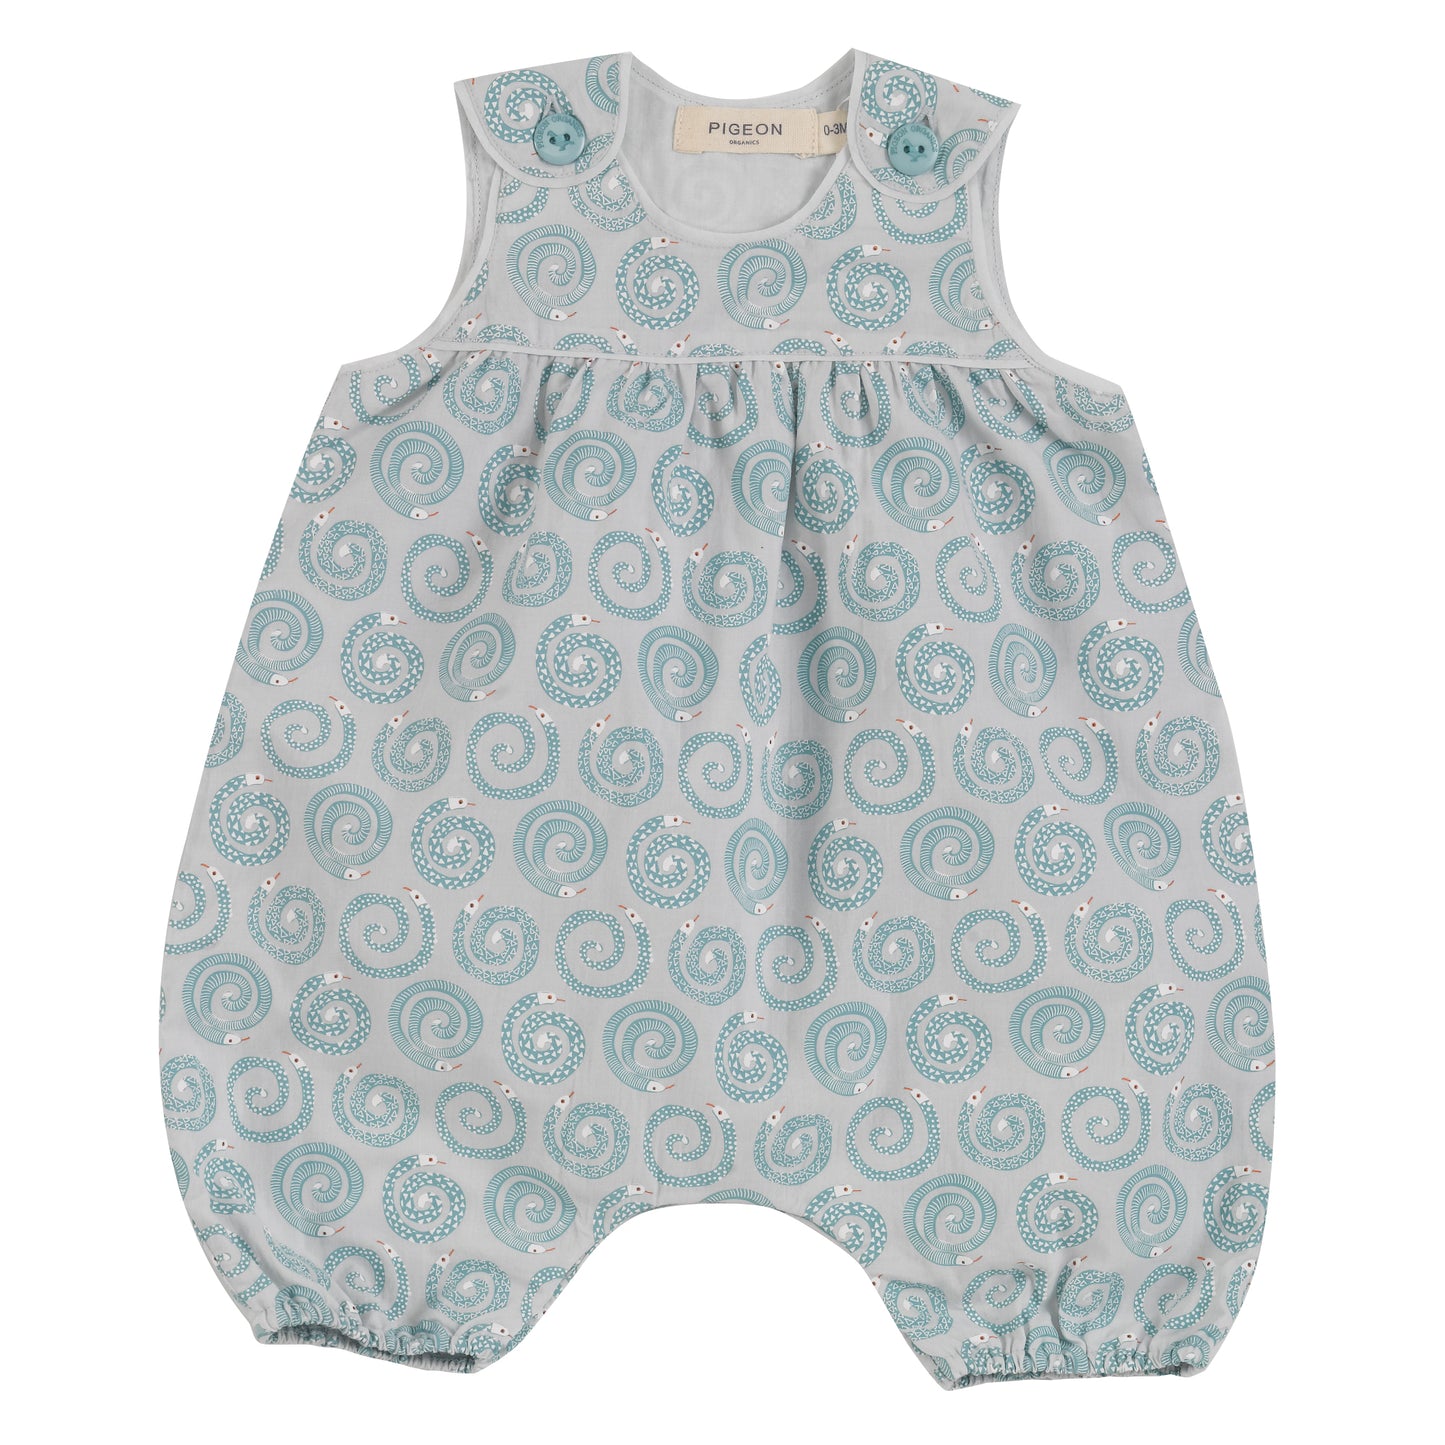 Snakes turquoise playsuit